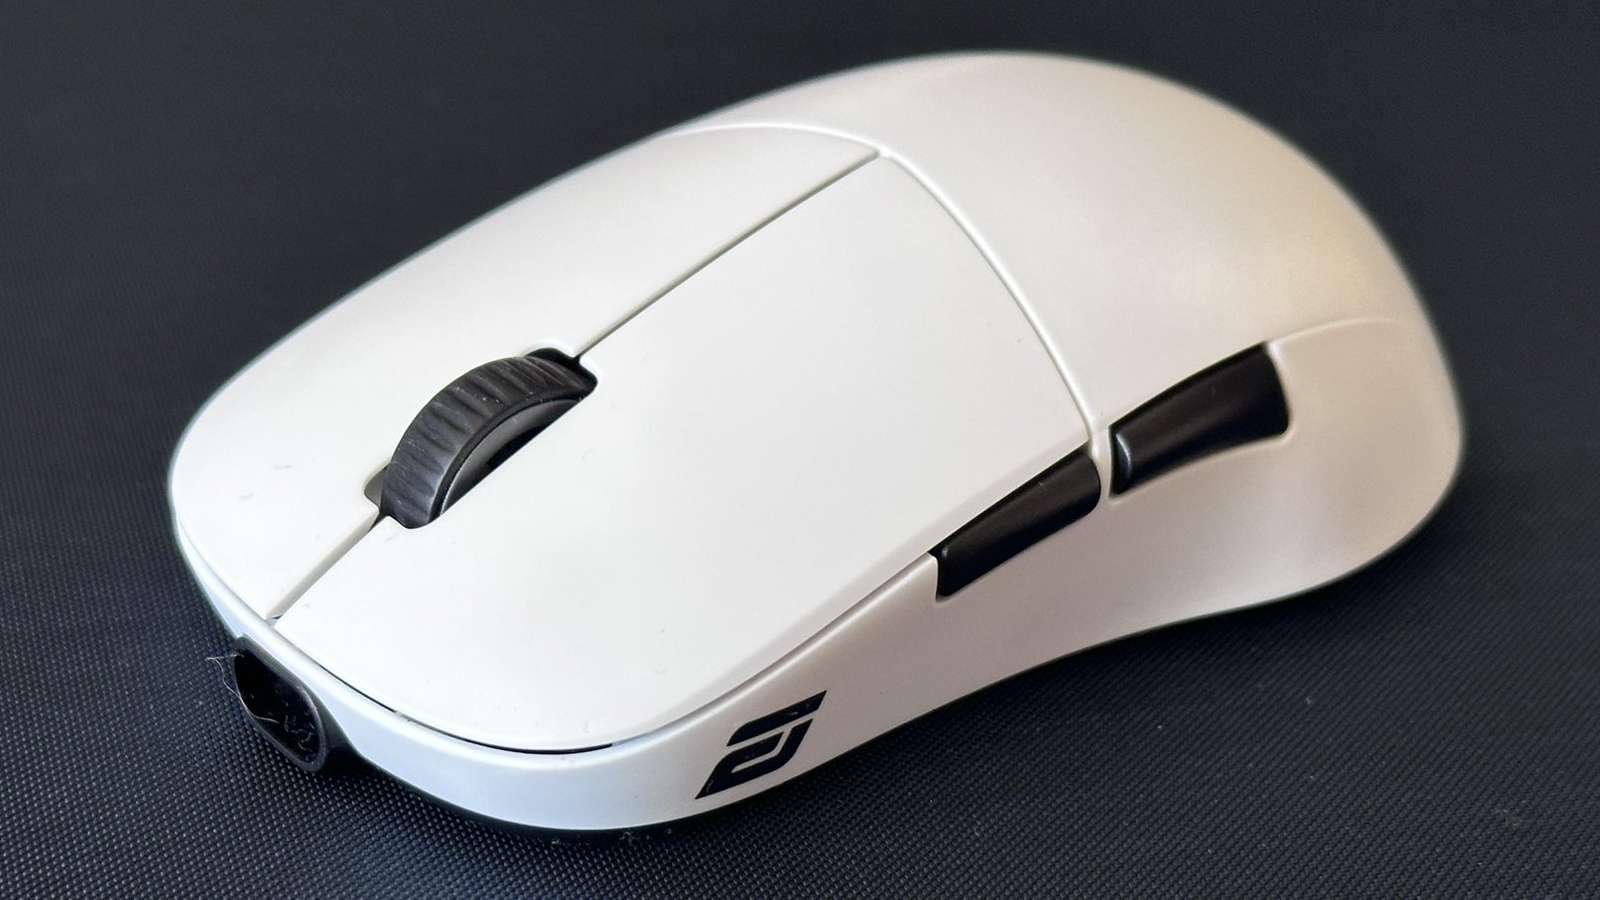 Endgame Gear XM2we review: The ultimate claw grip mouse